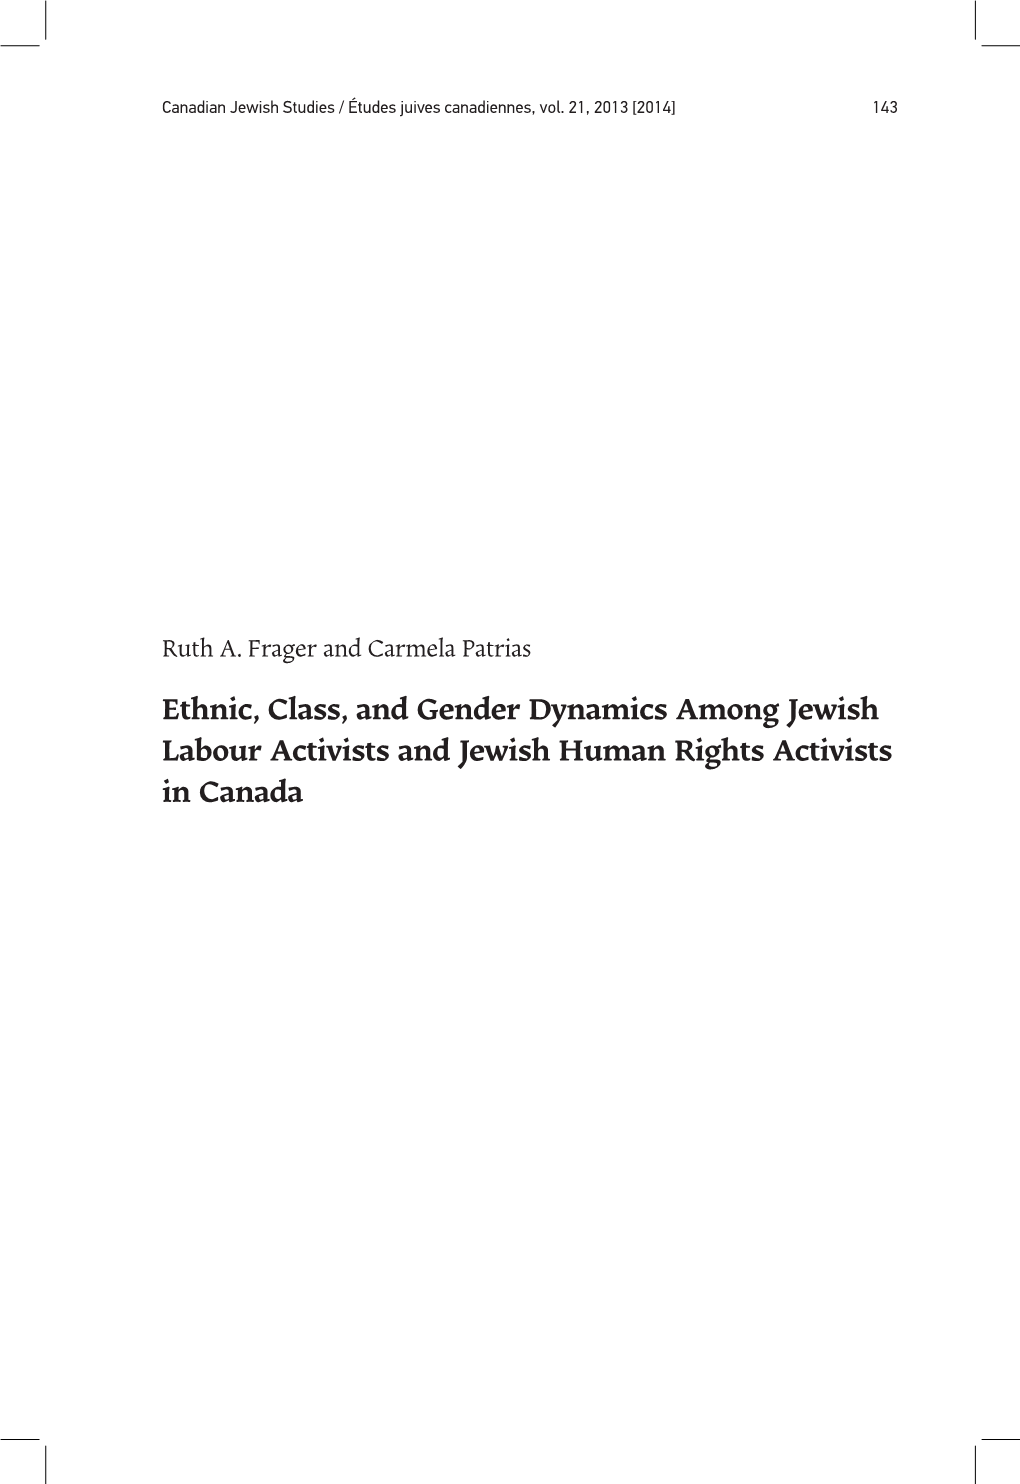 Ethnic, Class, and Gender Dynamics Among Jewish Labour Activists and Jewish Human Rights Activists in Canada Ruth A